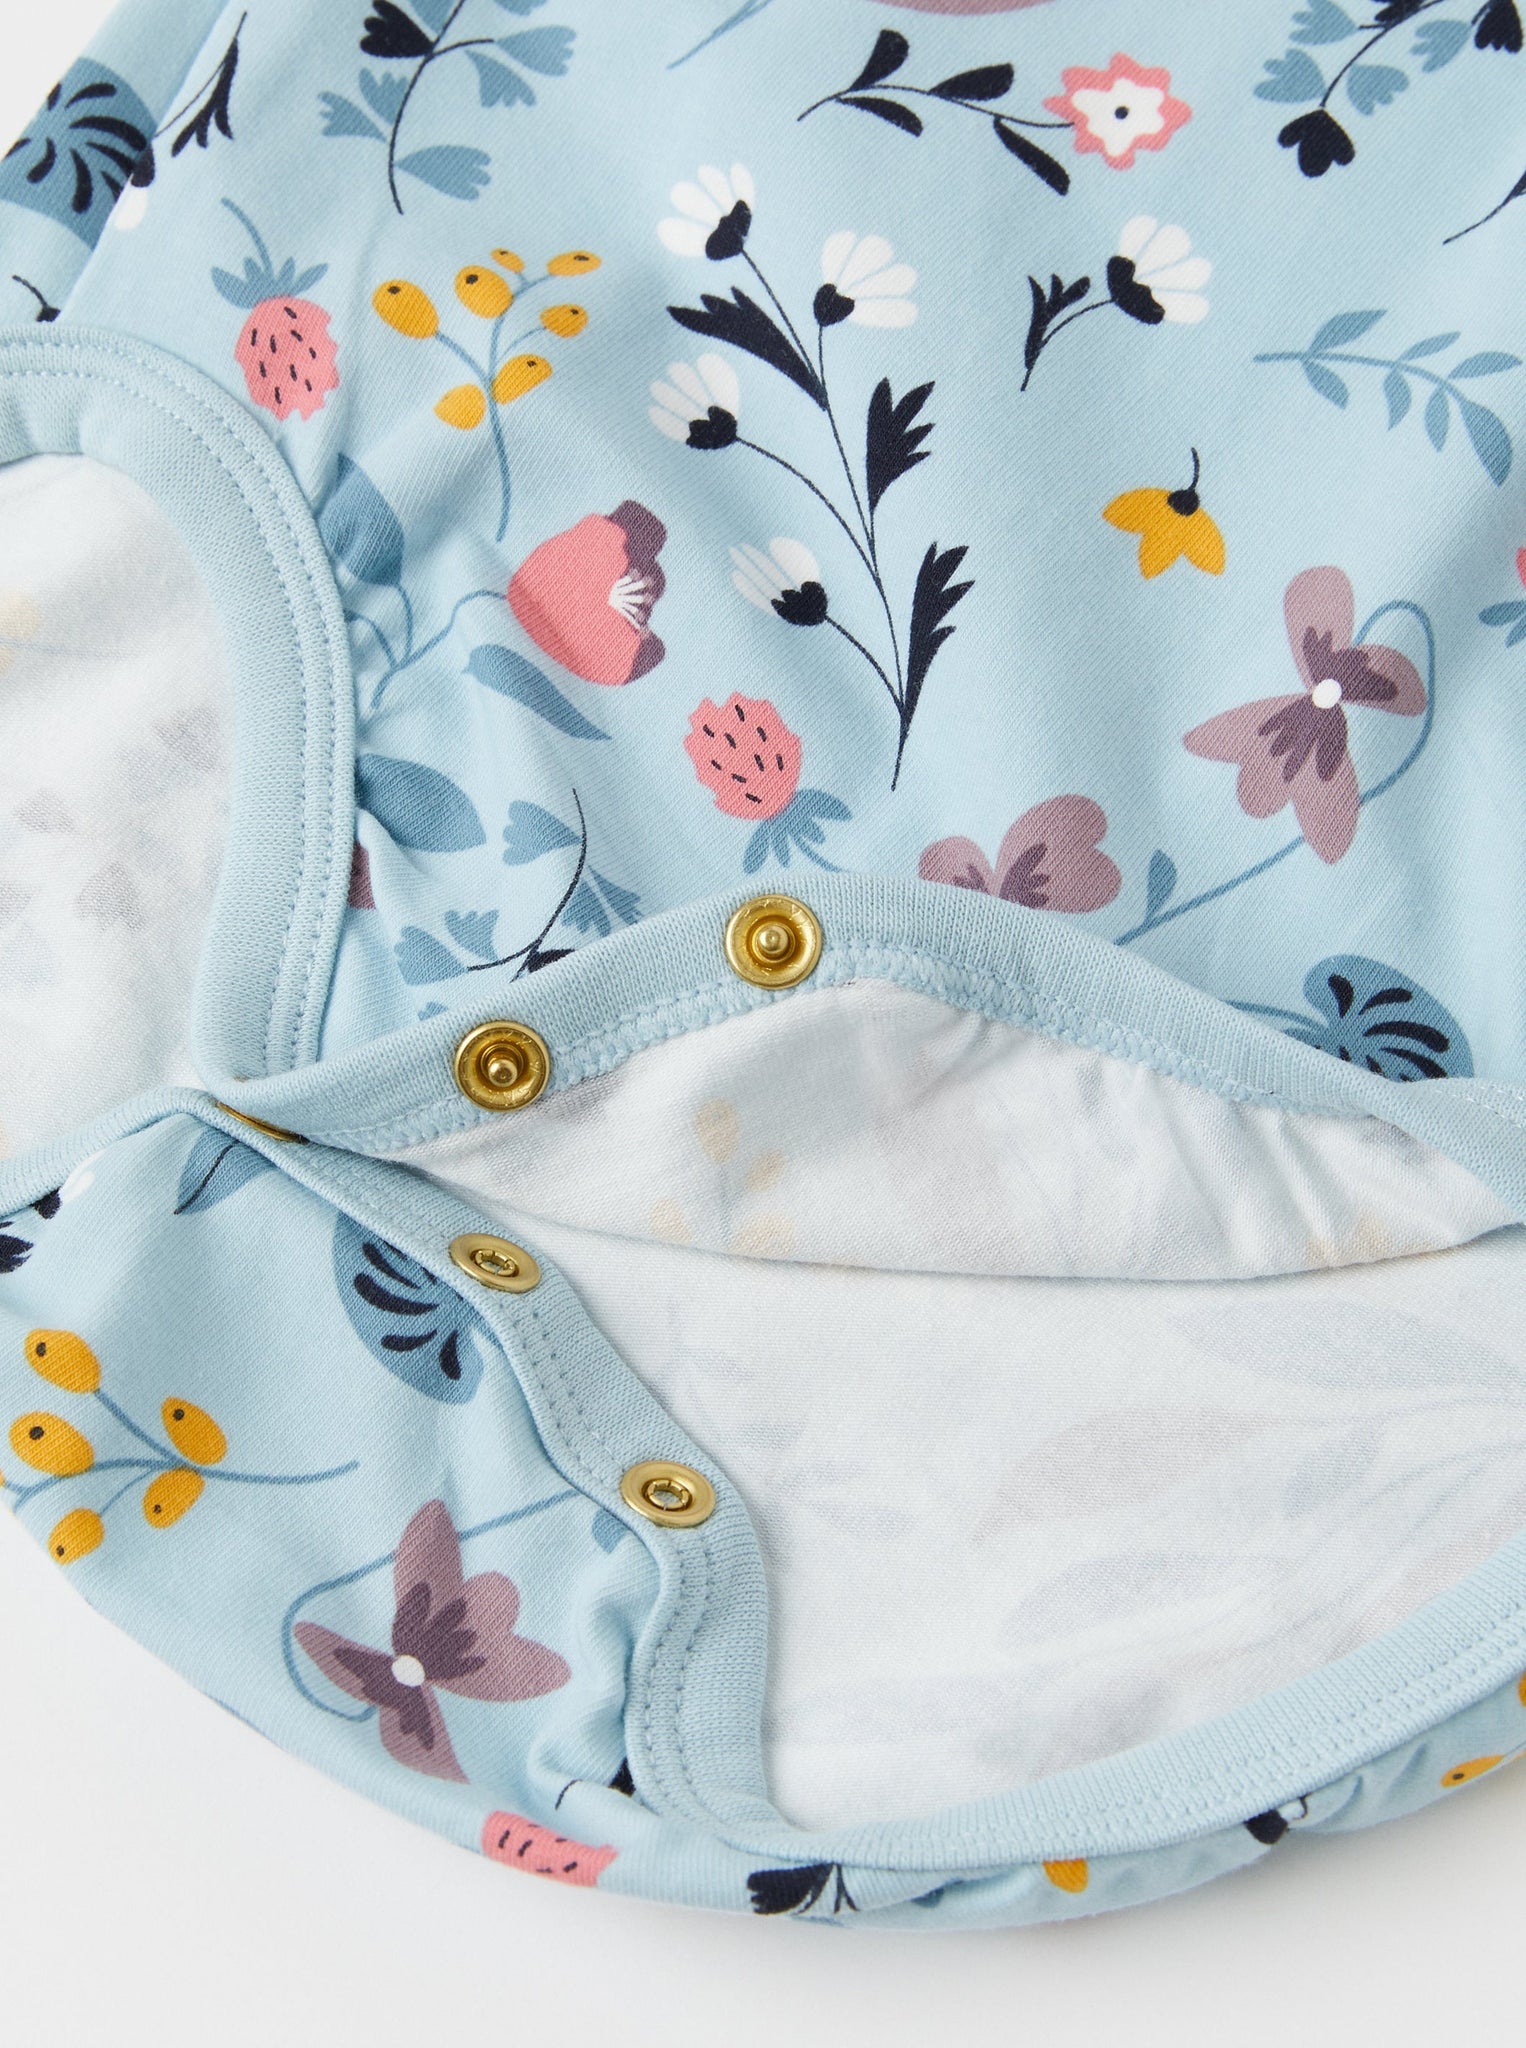 Blue Floral Wraparound Babygrow from the Polarn O. Pyret babywear collection. Nordic baby clothes made from sustainable sources.